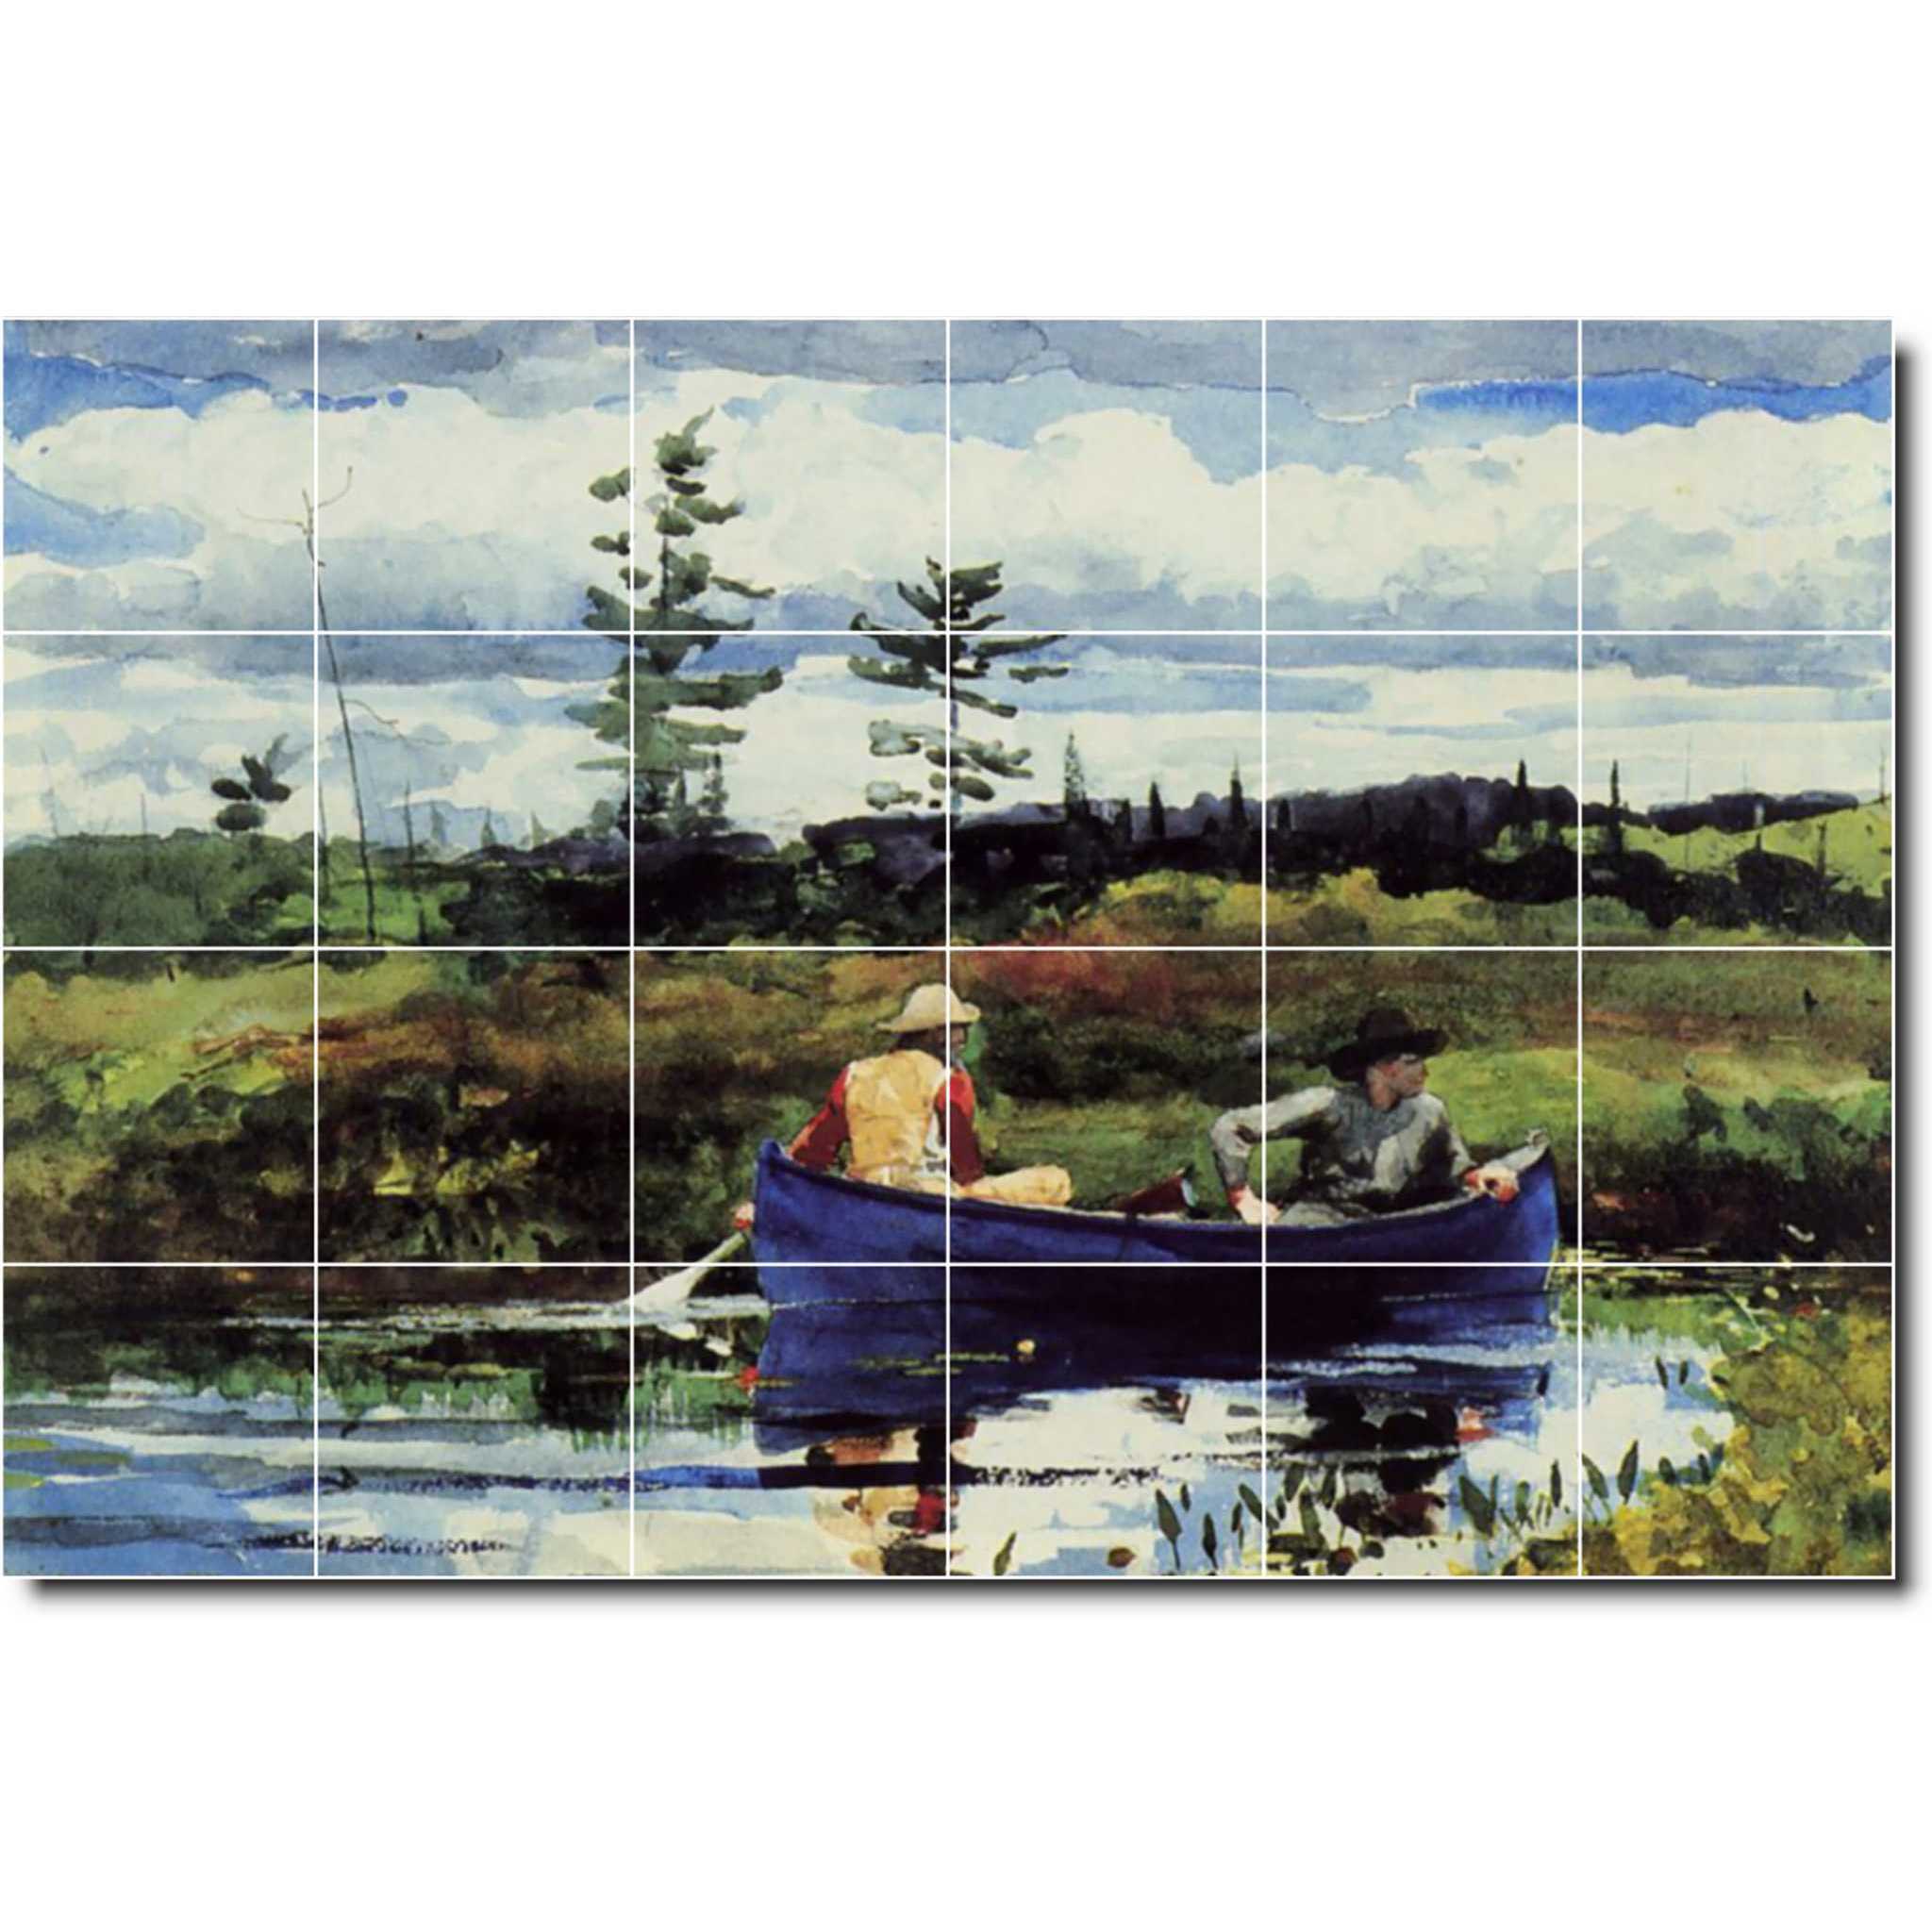 Winslow Homer Country Painting Ceramic Tile Mural P04478-XL. 72"W x 48"H (24) 12x12 tiles